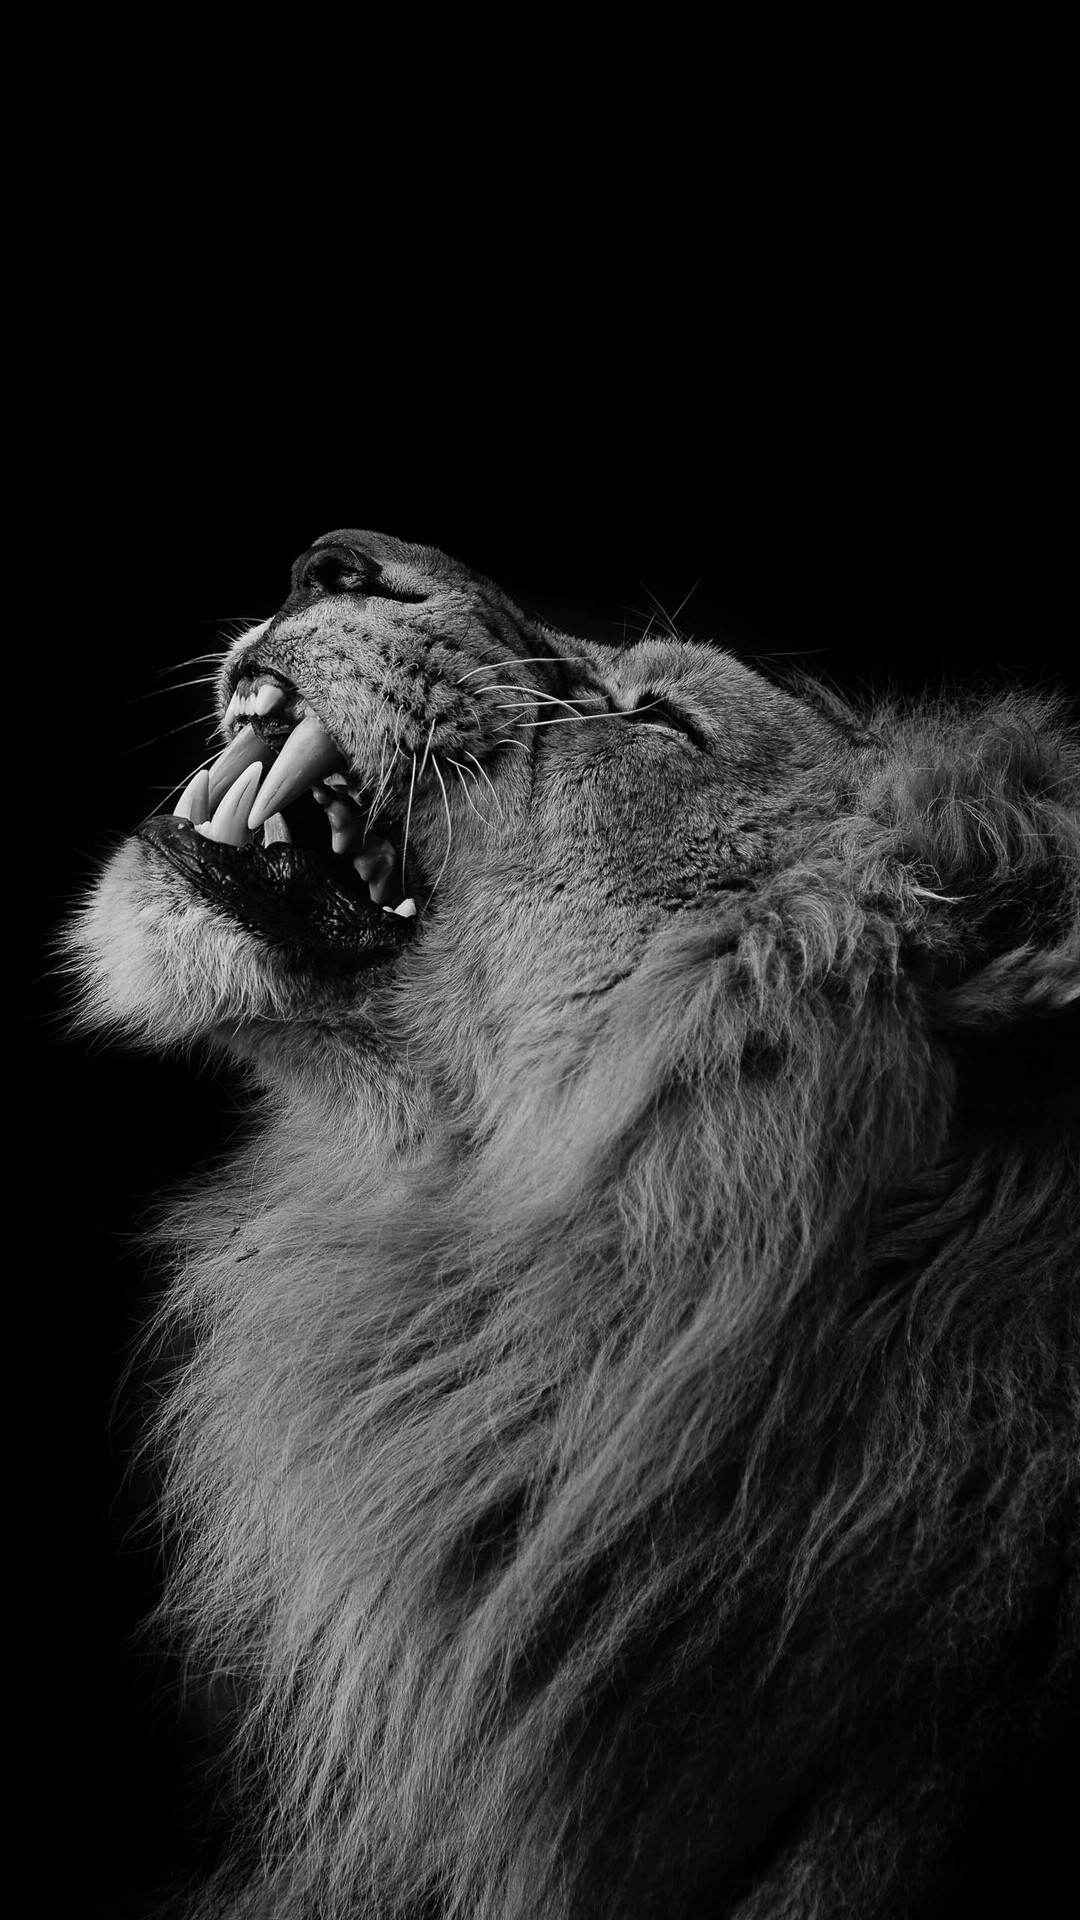 lion wallpaper iphone,lion,black and white,felidae,wildlife,big cats